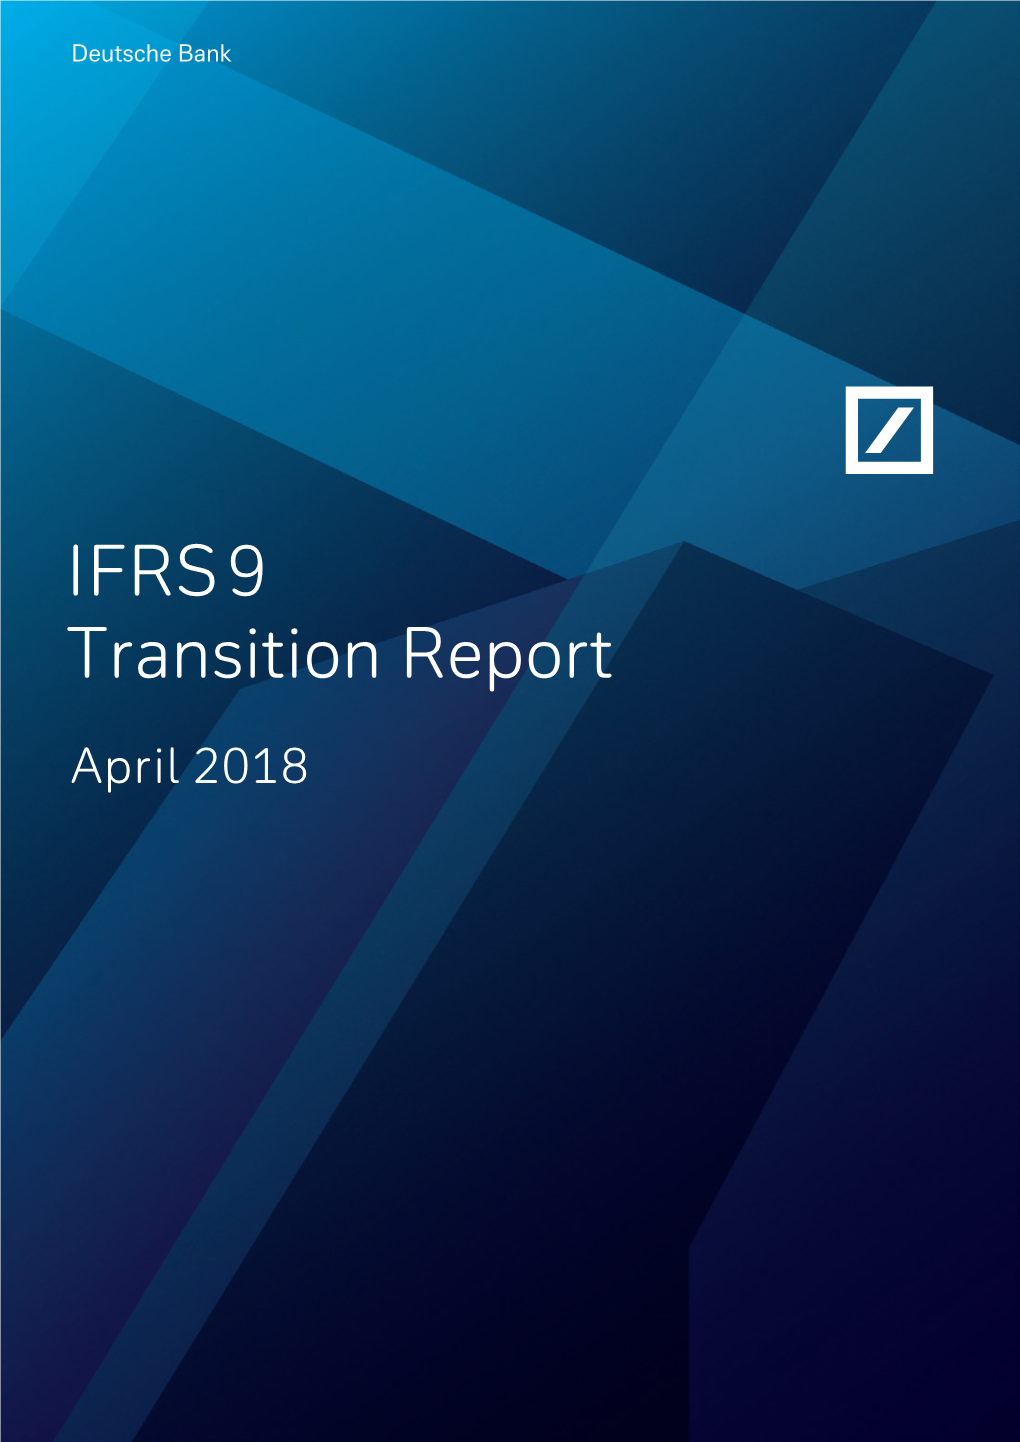 IFRS 9 Transition Report